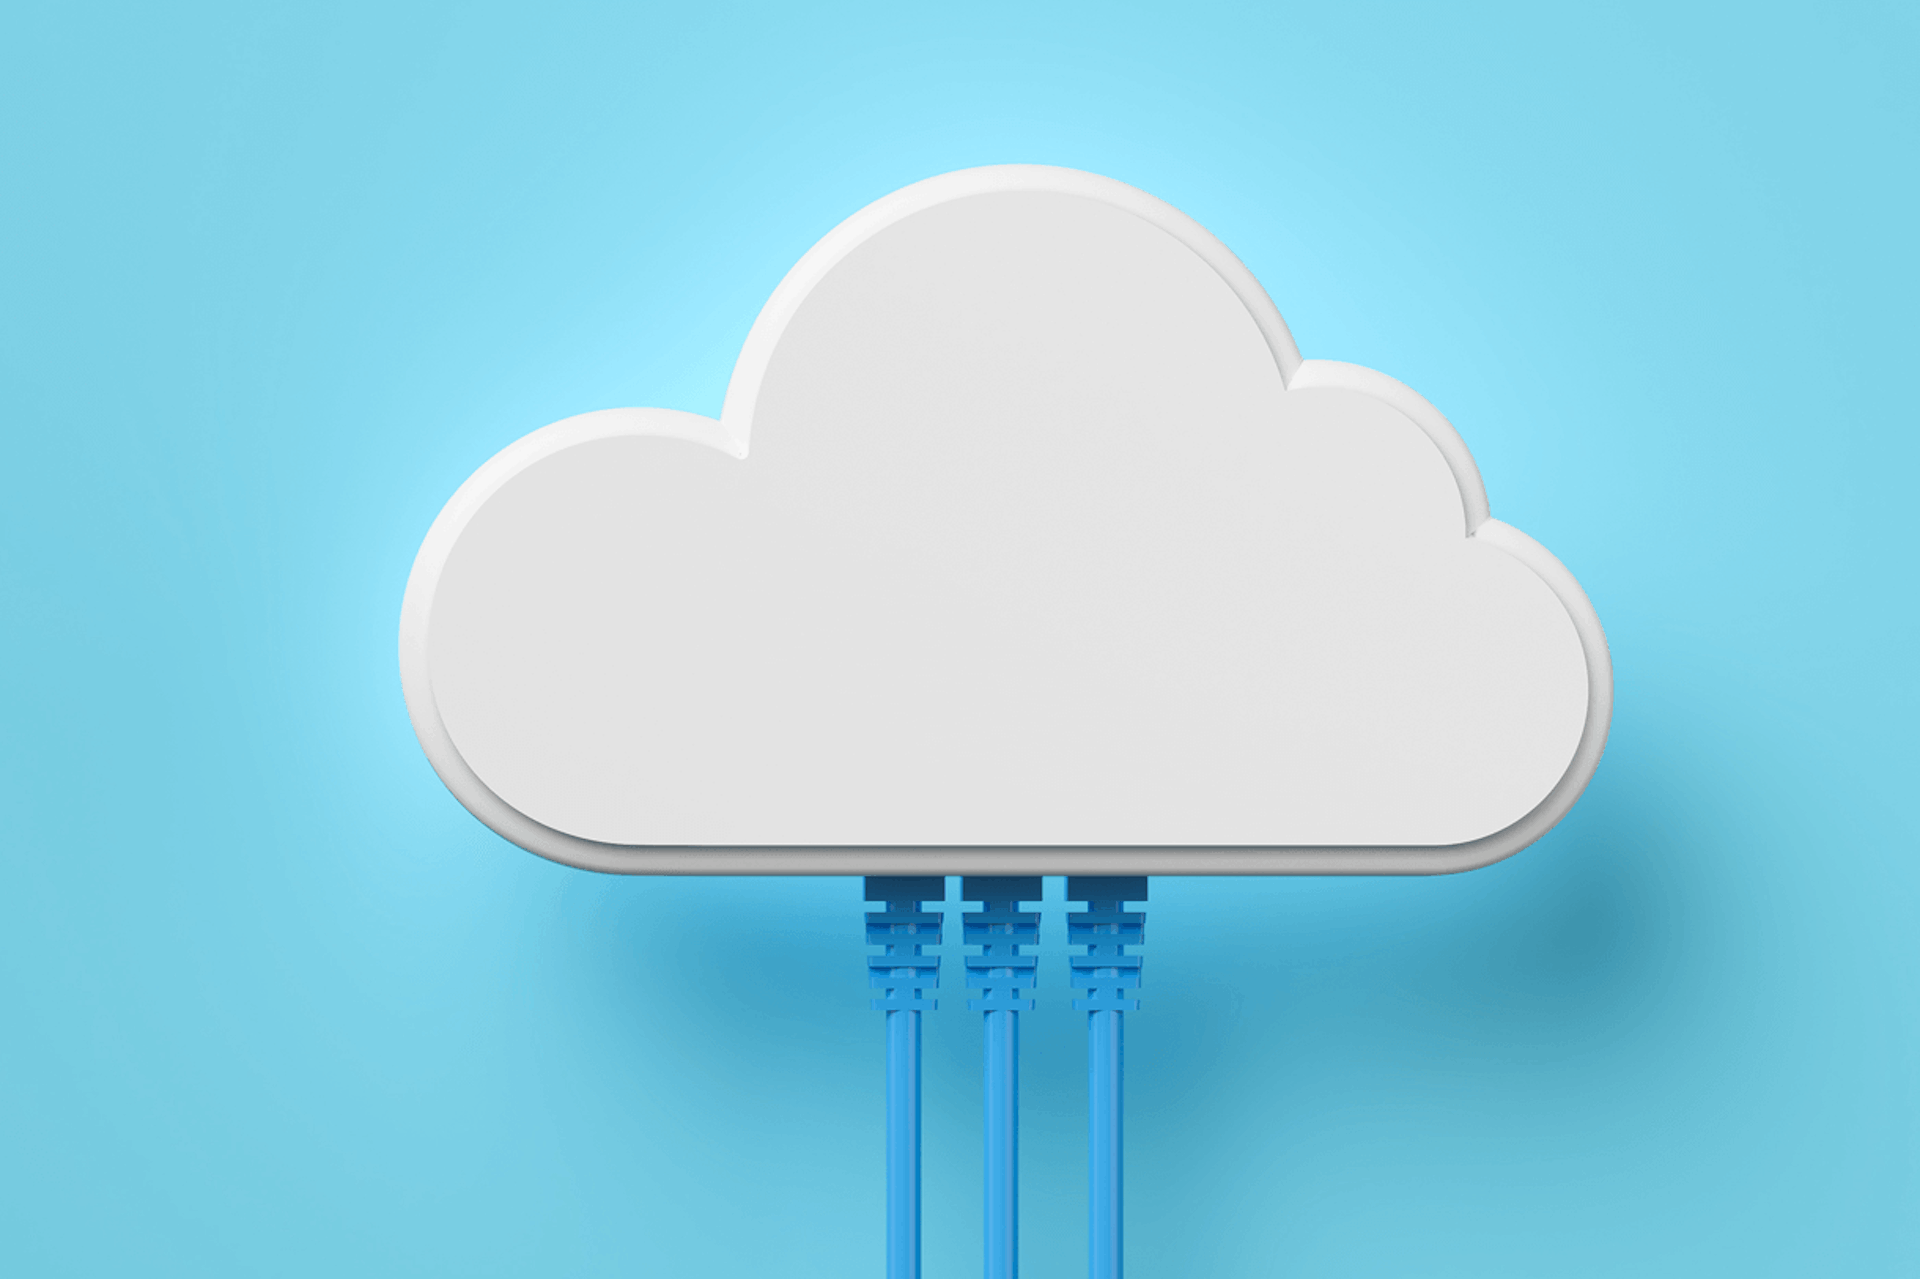 Illustration showing a cloud with three blue cables coming out of the bottom, on a light blue background. centralized Competitive Intelligence Database blog post.